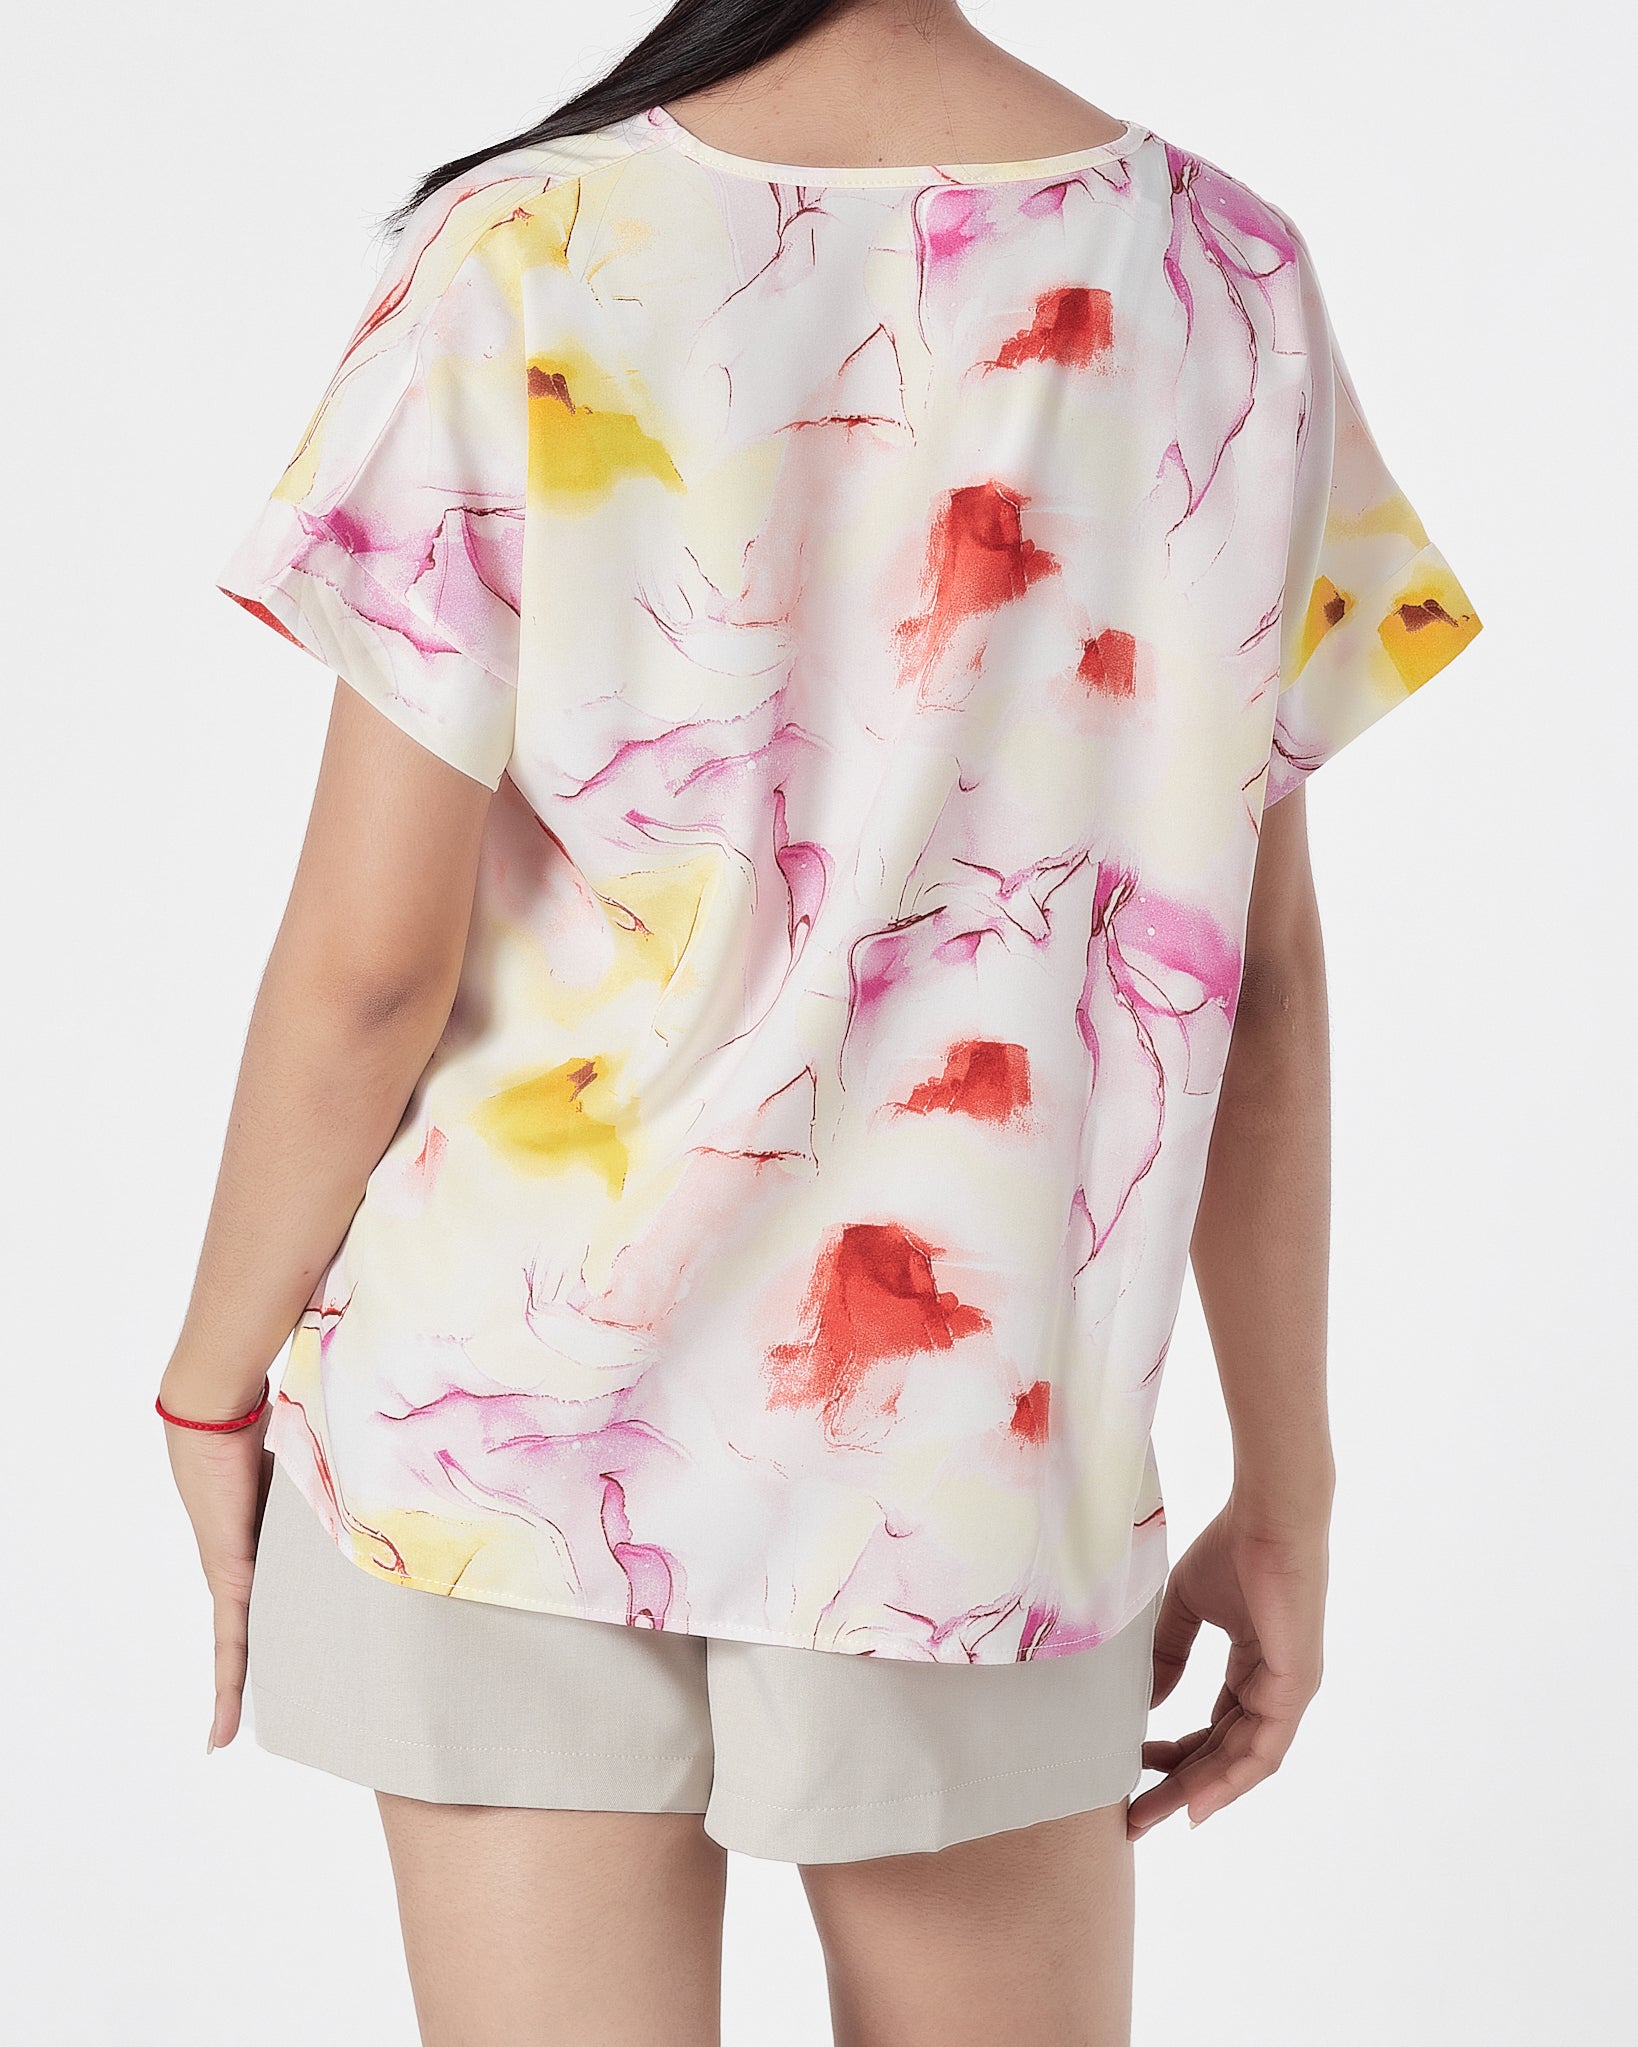 Floral Over Printed Lady  Shirts Short Sleeve 12.90